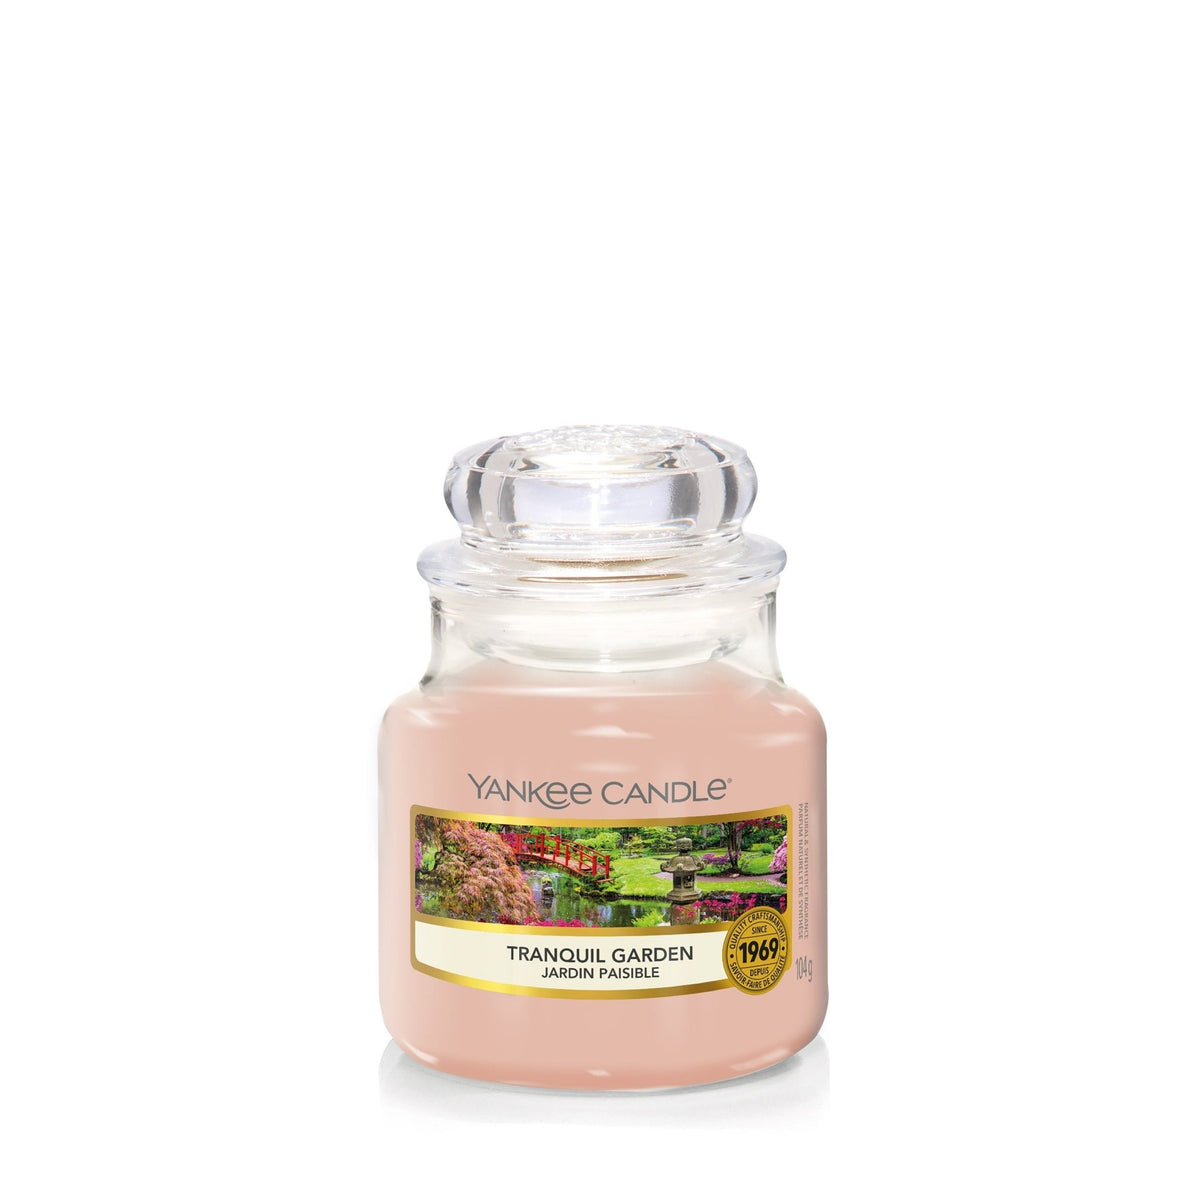 Yankee Candle Classic Small Jar Tranquil Garden 104G - AllurebeautypkYankee Candle Classic Small Jar Tranquil Garden 104G